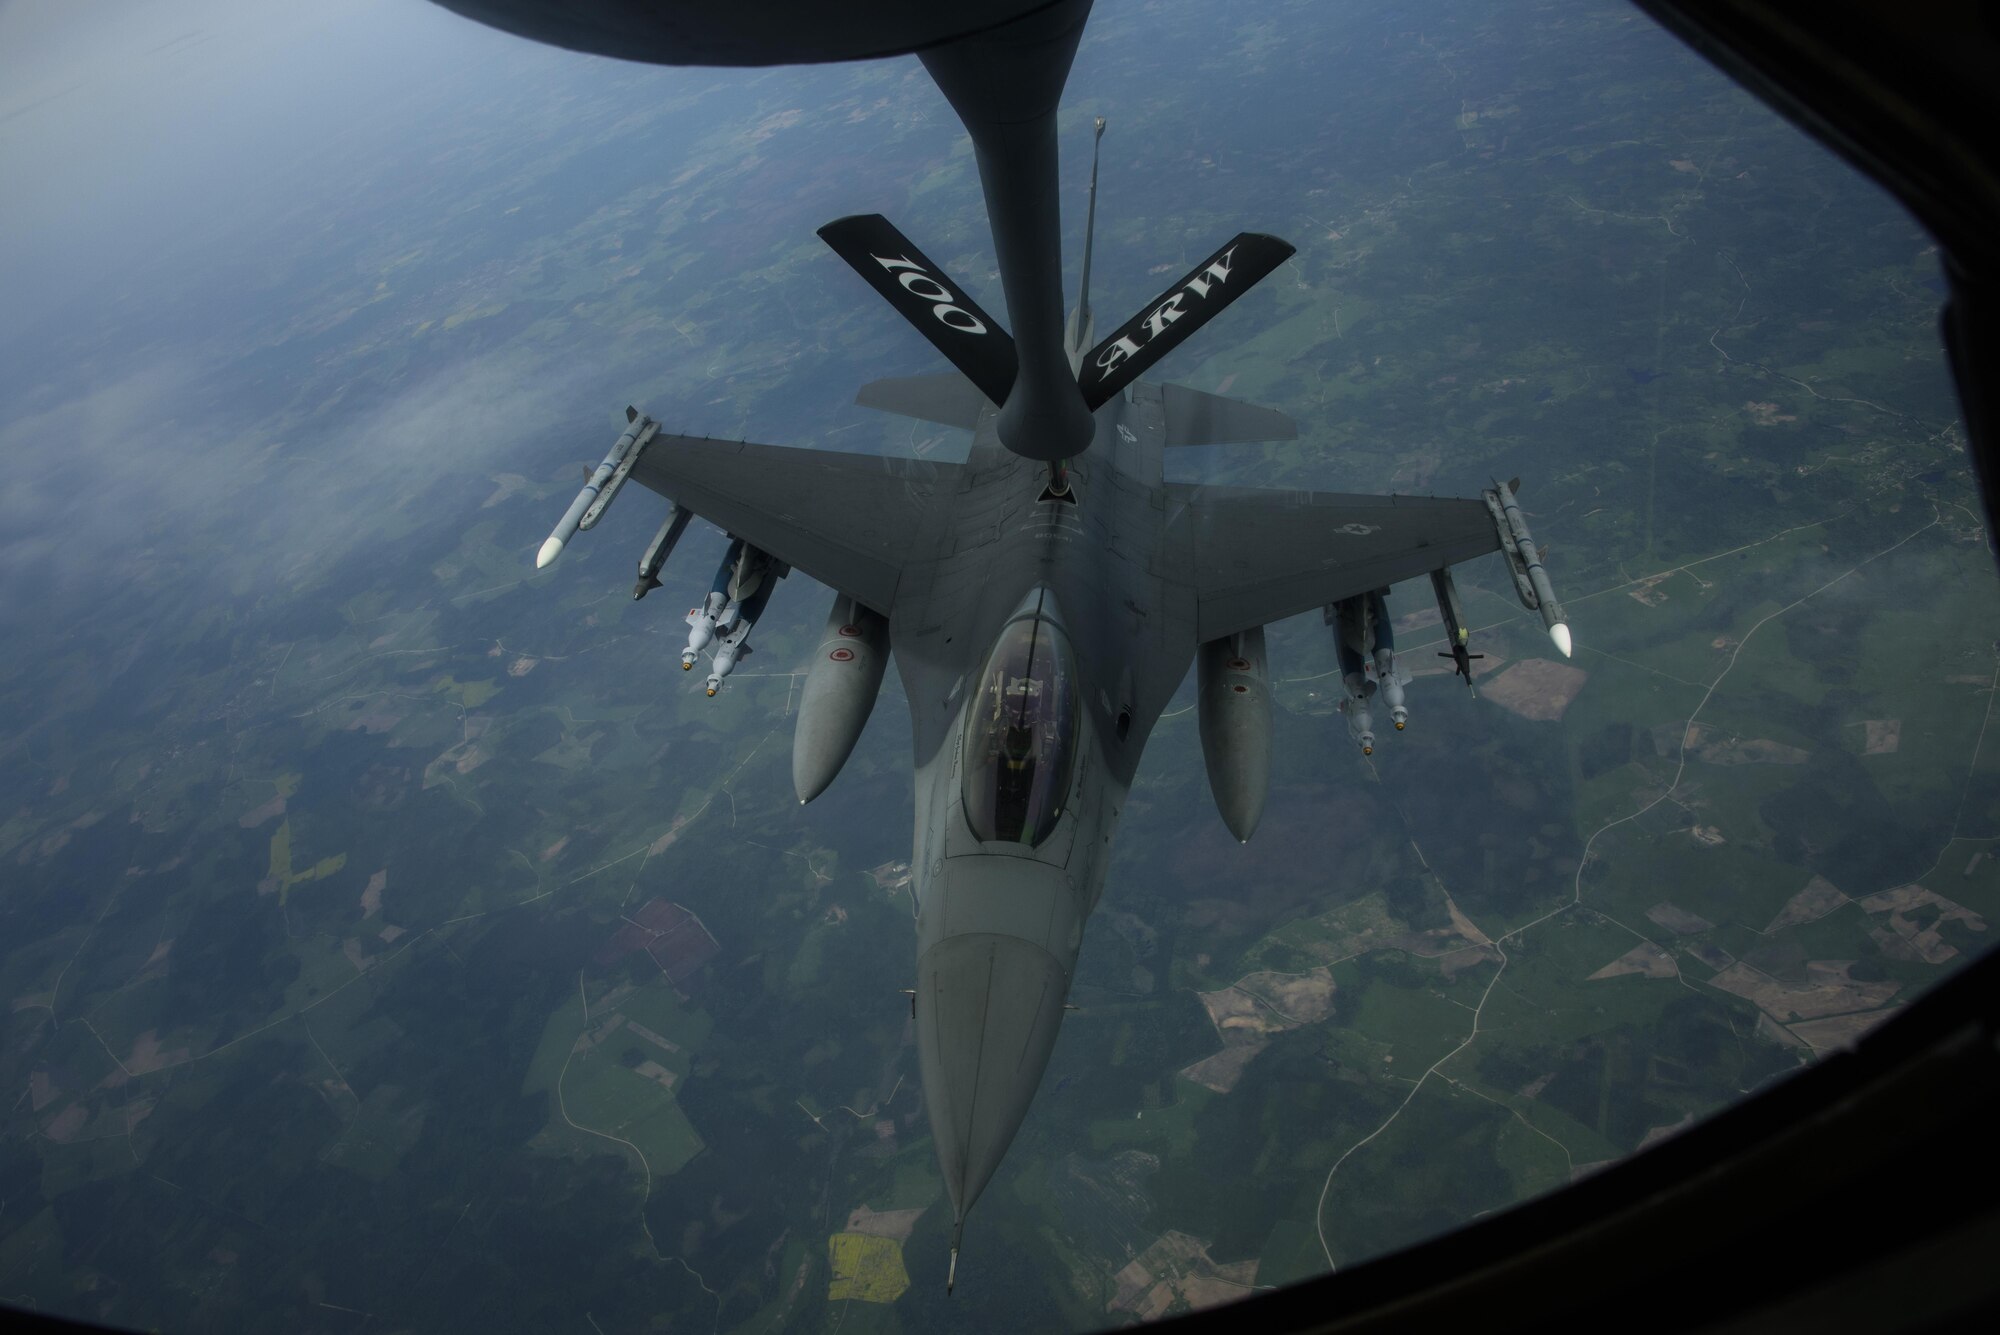 An F-16 Fighting Falcon, 510th Fighter Squadron, deployed to Krzesiny Air Base, Poland, in support of Aviation Detachment rotation 17-3, exercise BALTOPS and exercise Saber Strike, refuels from a KC-135R Stratotanker, 100th Air Refueling Wing, from RAF Mildenhall, England over Latvia, June 7, 2017. The exercise, is designed to
enhance flexibility and interoperability, to strengthen combined response capabilities, as well as demonstrate
resolve among Allied and Partner Nations' forces to ensure stability in, and if necessary defend, the Baltic Sea region. (U.S. Air Force photo by Staff Sgt. Jonathan Snyder)